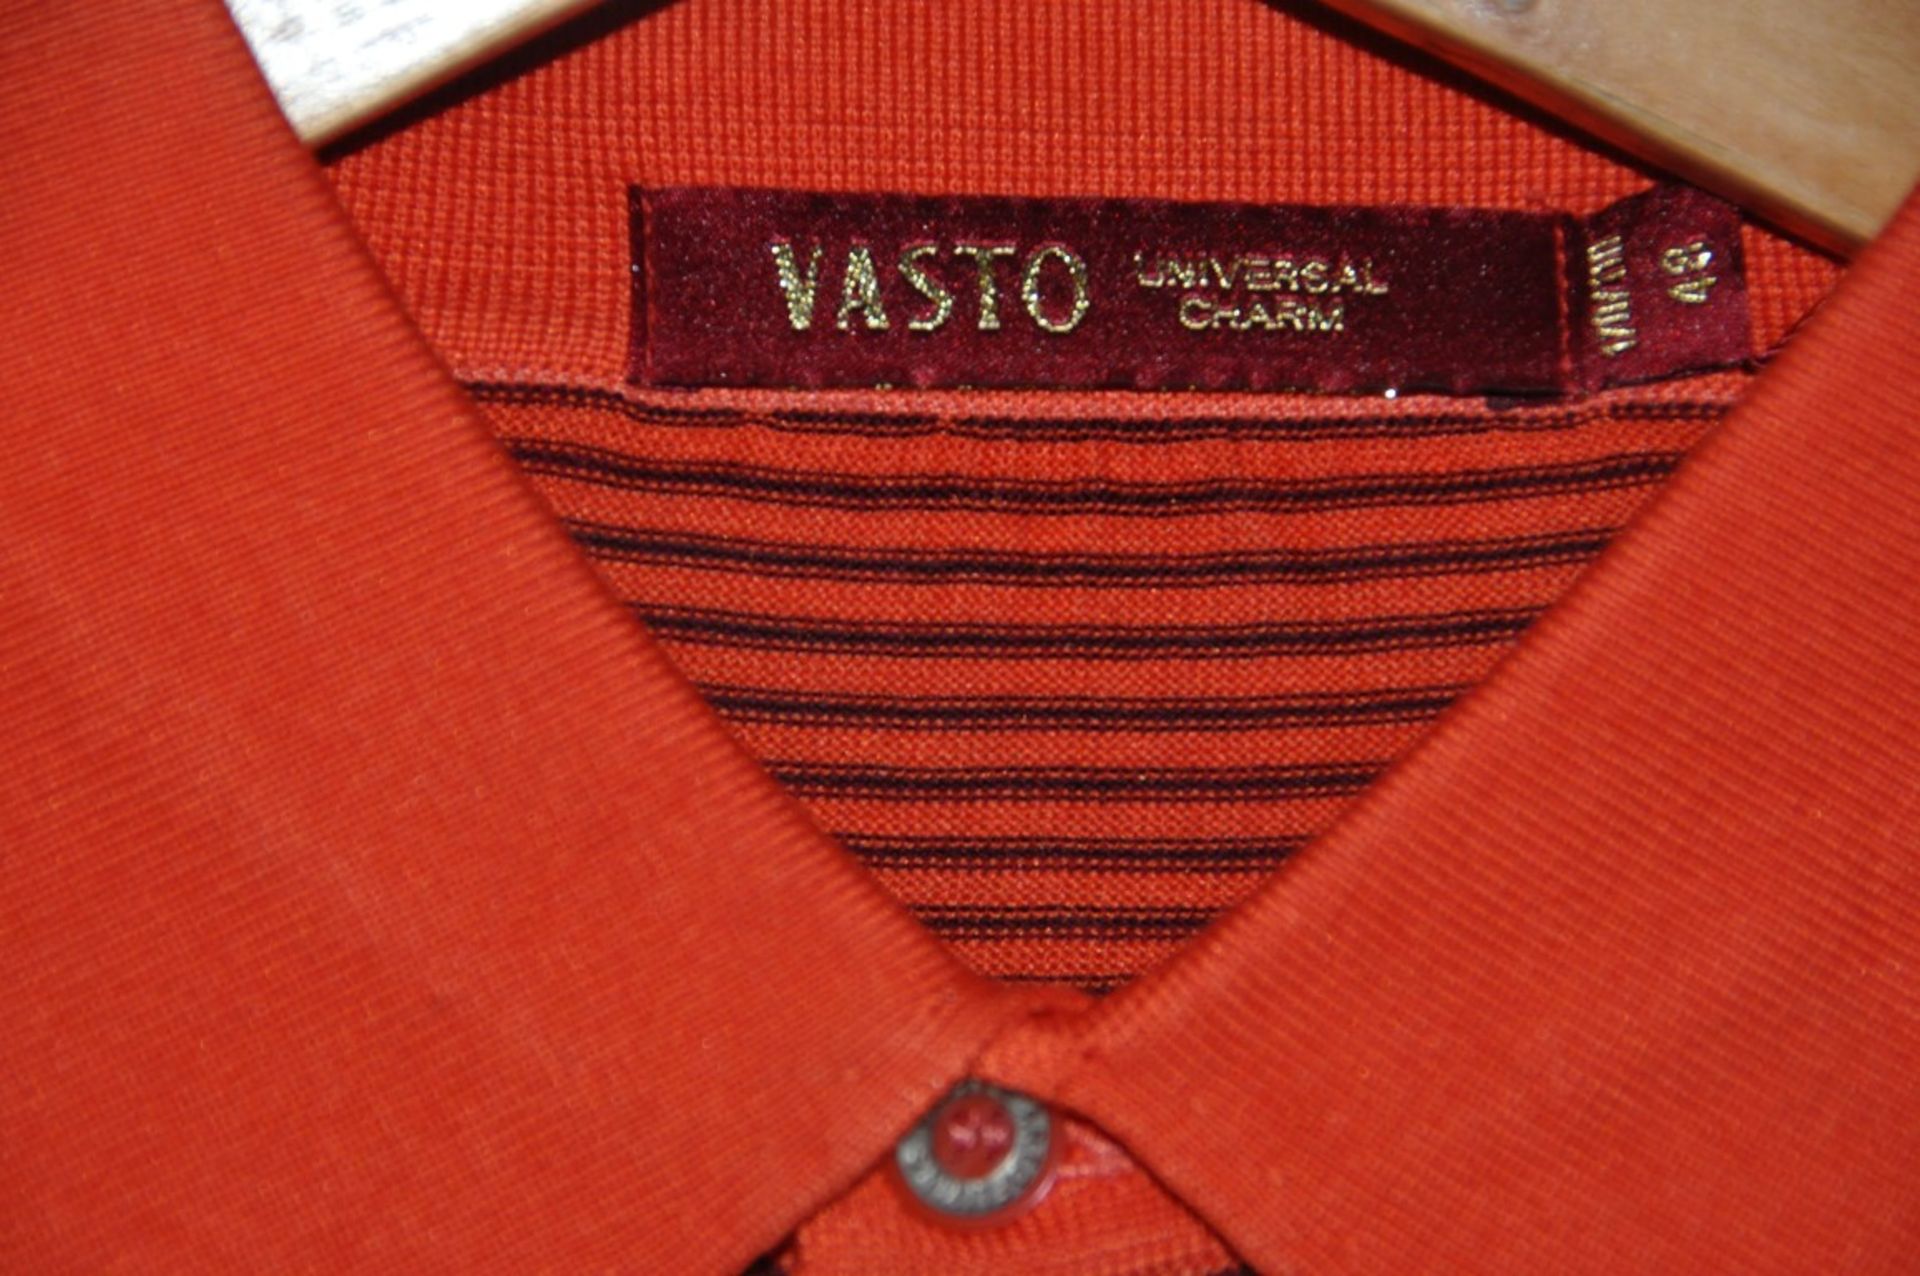 1 x Men's Long Sleeve Striped Top By International Luxury Brand "Vasto" (CAM7401) - Size: Extra - Image 2 of 5